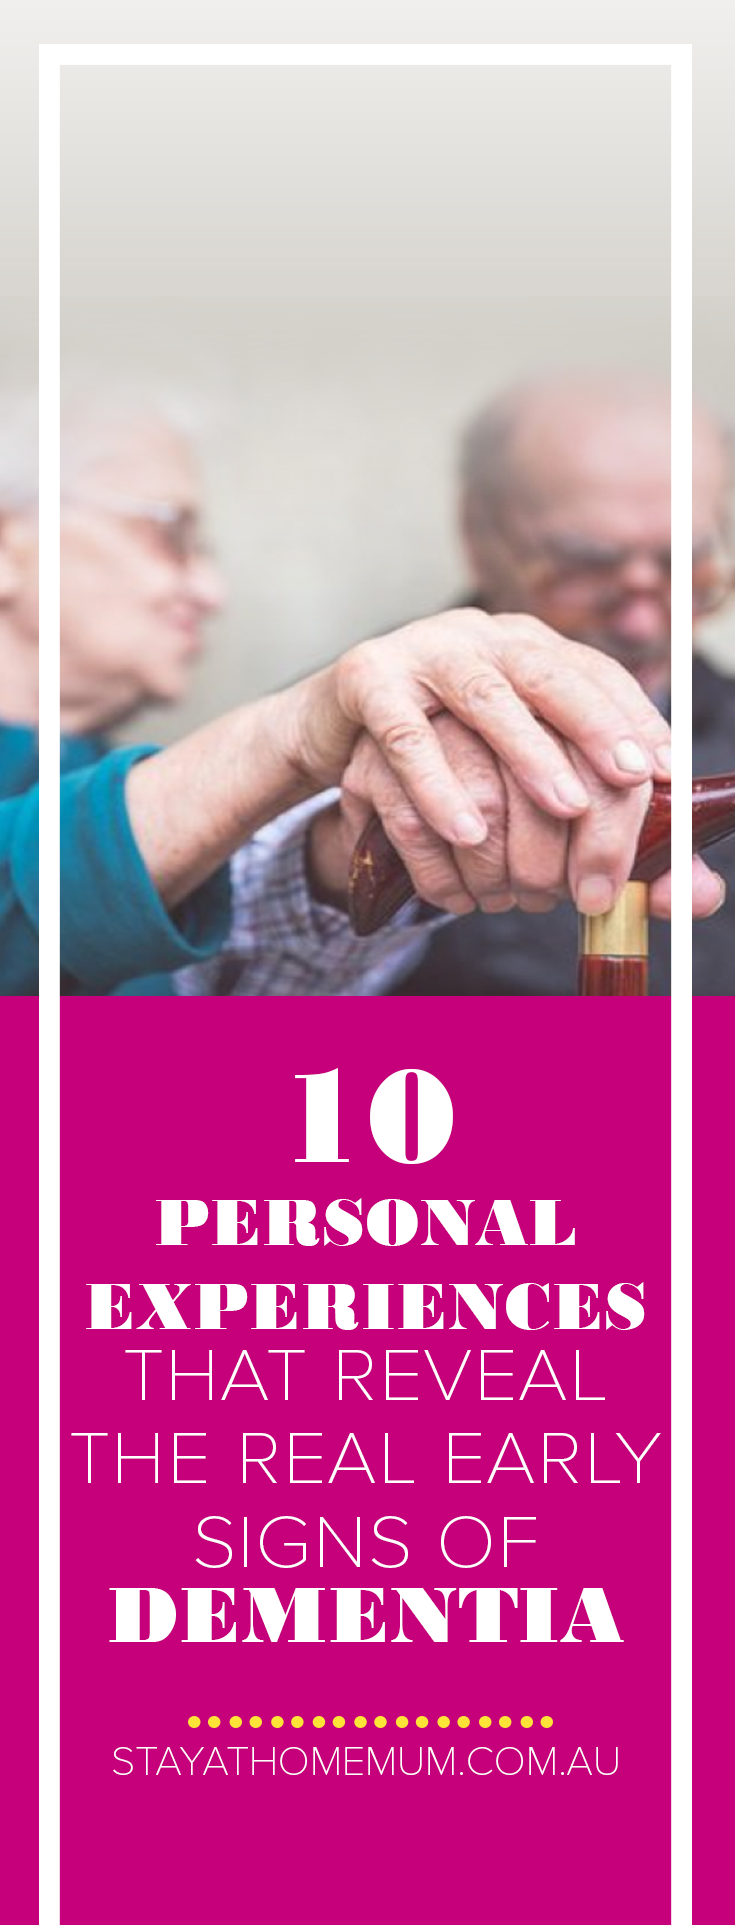 10 Personal Experiences that Reveal the Real Early Signs of Dementia | Stay At Home Mum